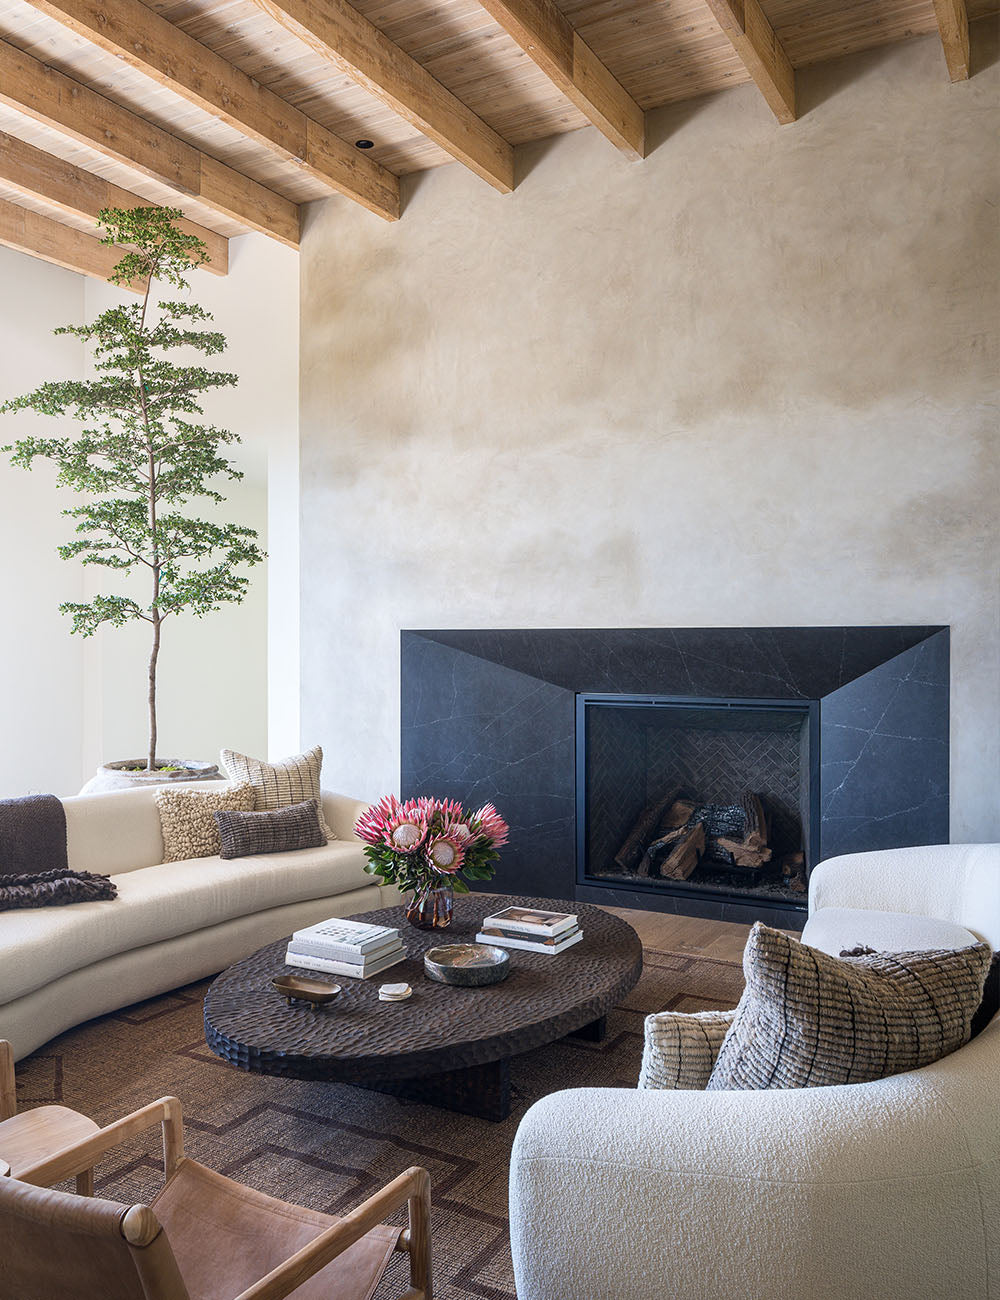 This California Home is a Lesson in Layering Textures